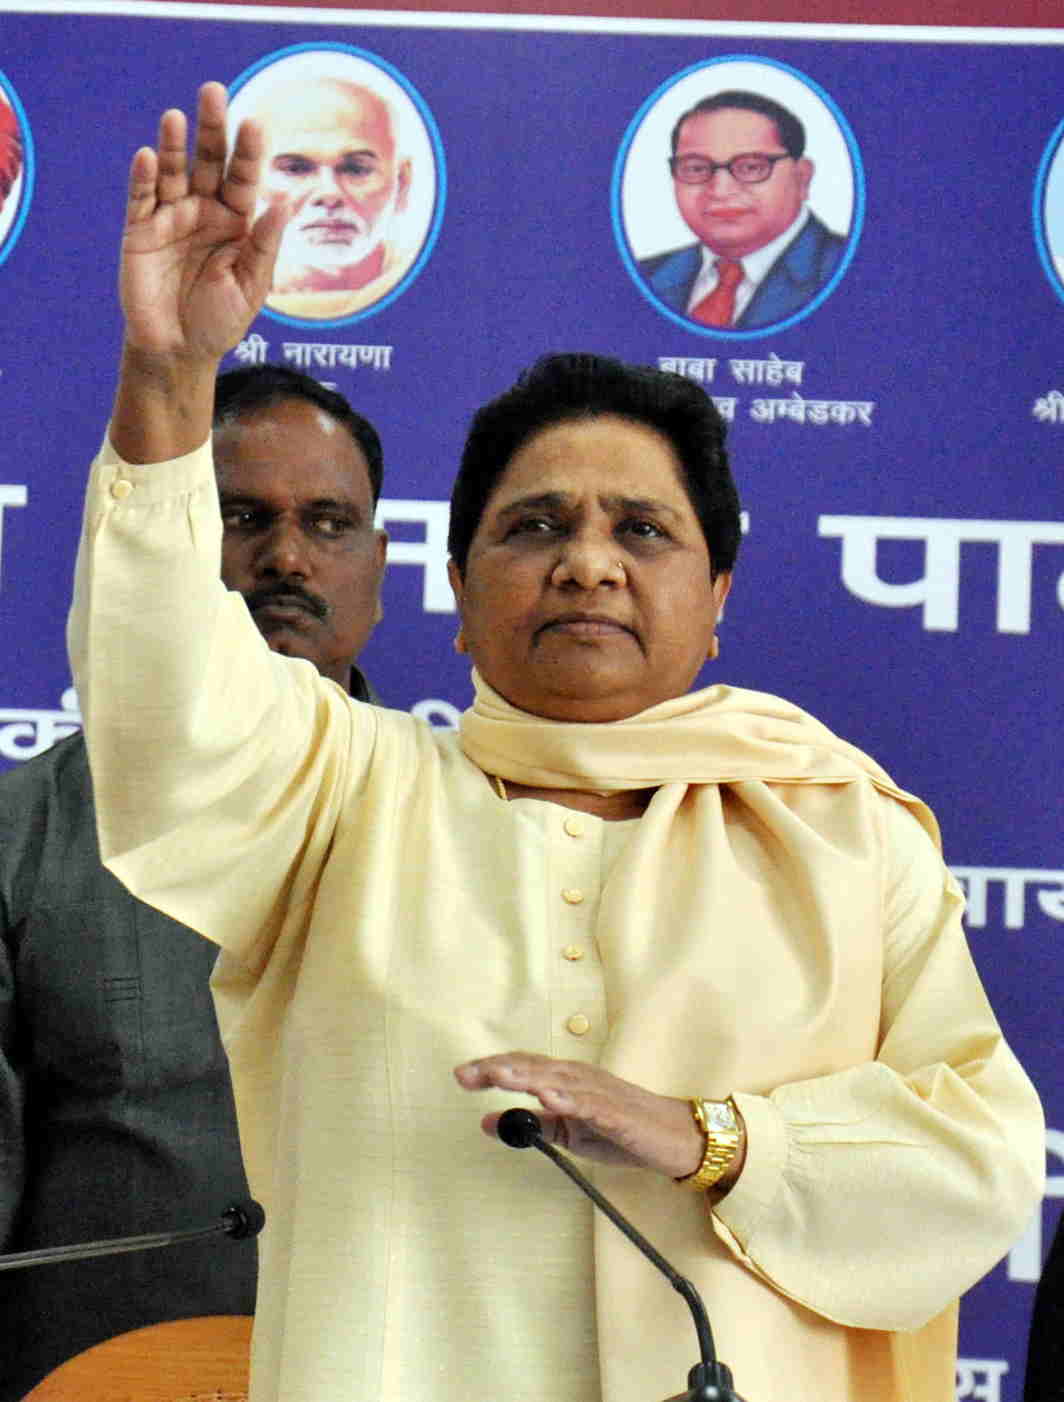 OUT TO CAMPAIGN: BSP supremo Mayawati waves party workers at a meeting ahead of the local bodies election, in Lucknow, UNI